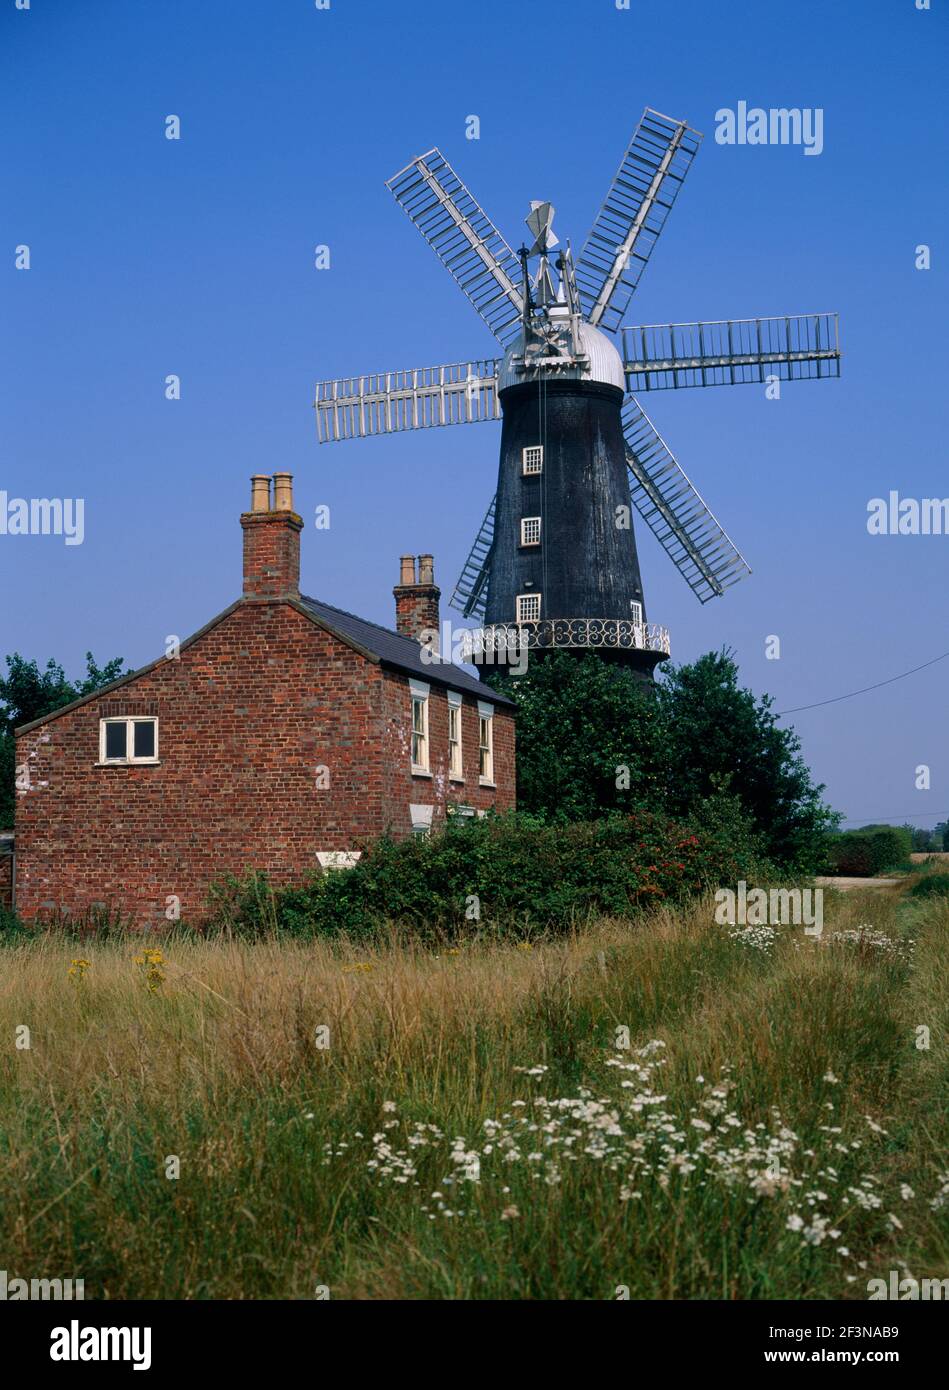 Sibsey Trader Windmill. Post mill. Round tower. Revolving. Large wooden sail. Struts. For harnessing wind power. Farming buildings. House.  Plants and Stock Photo